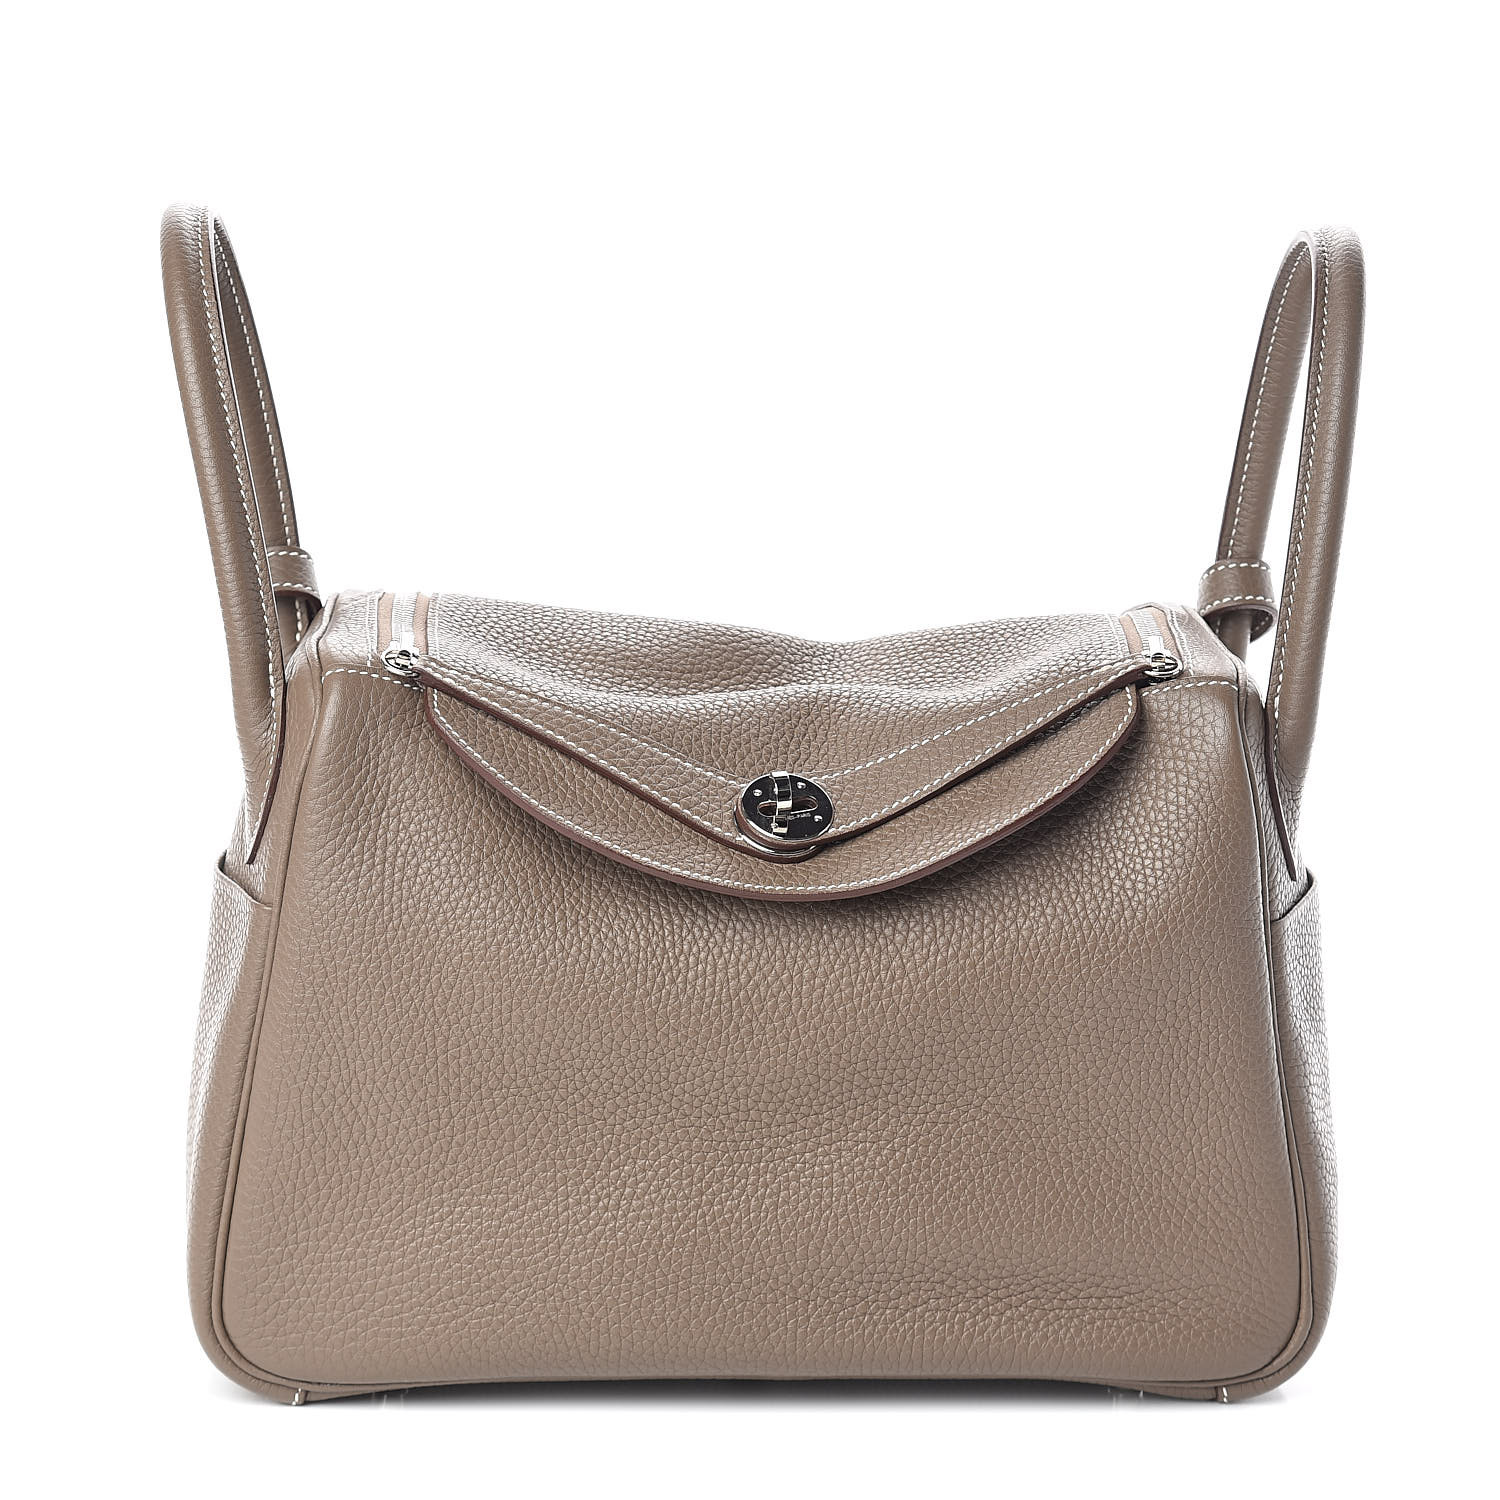 HERMES Taurillon Clemence Lindy 30 Etoupe 523356